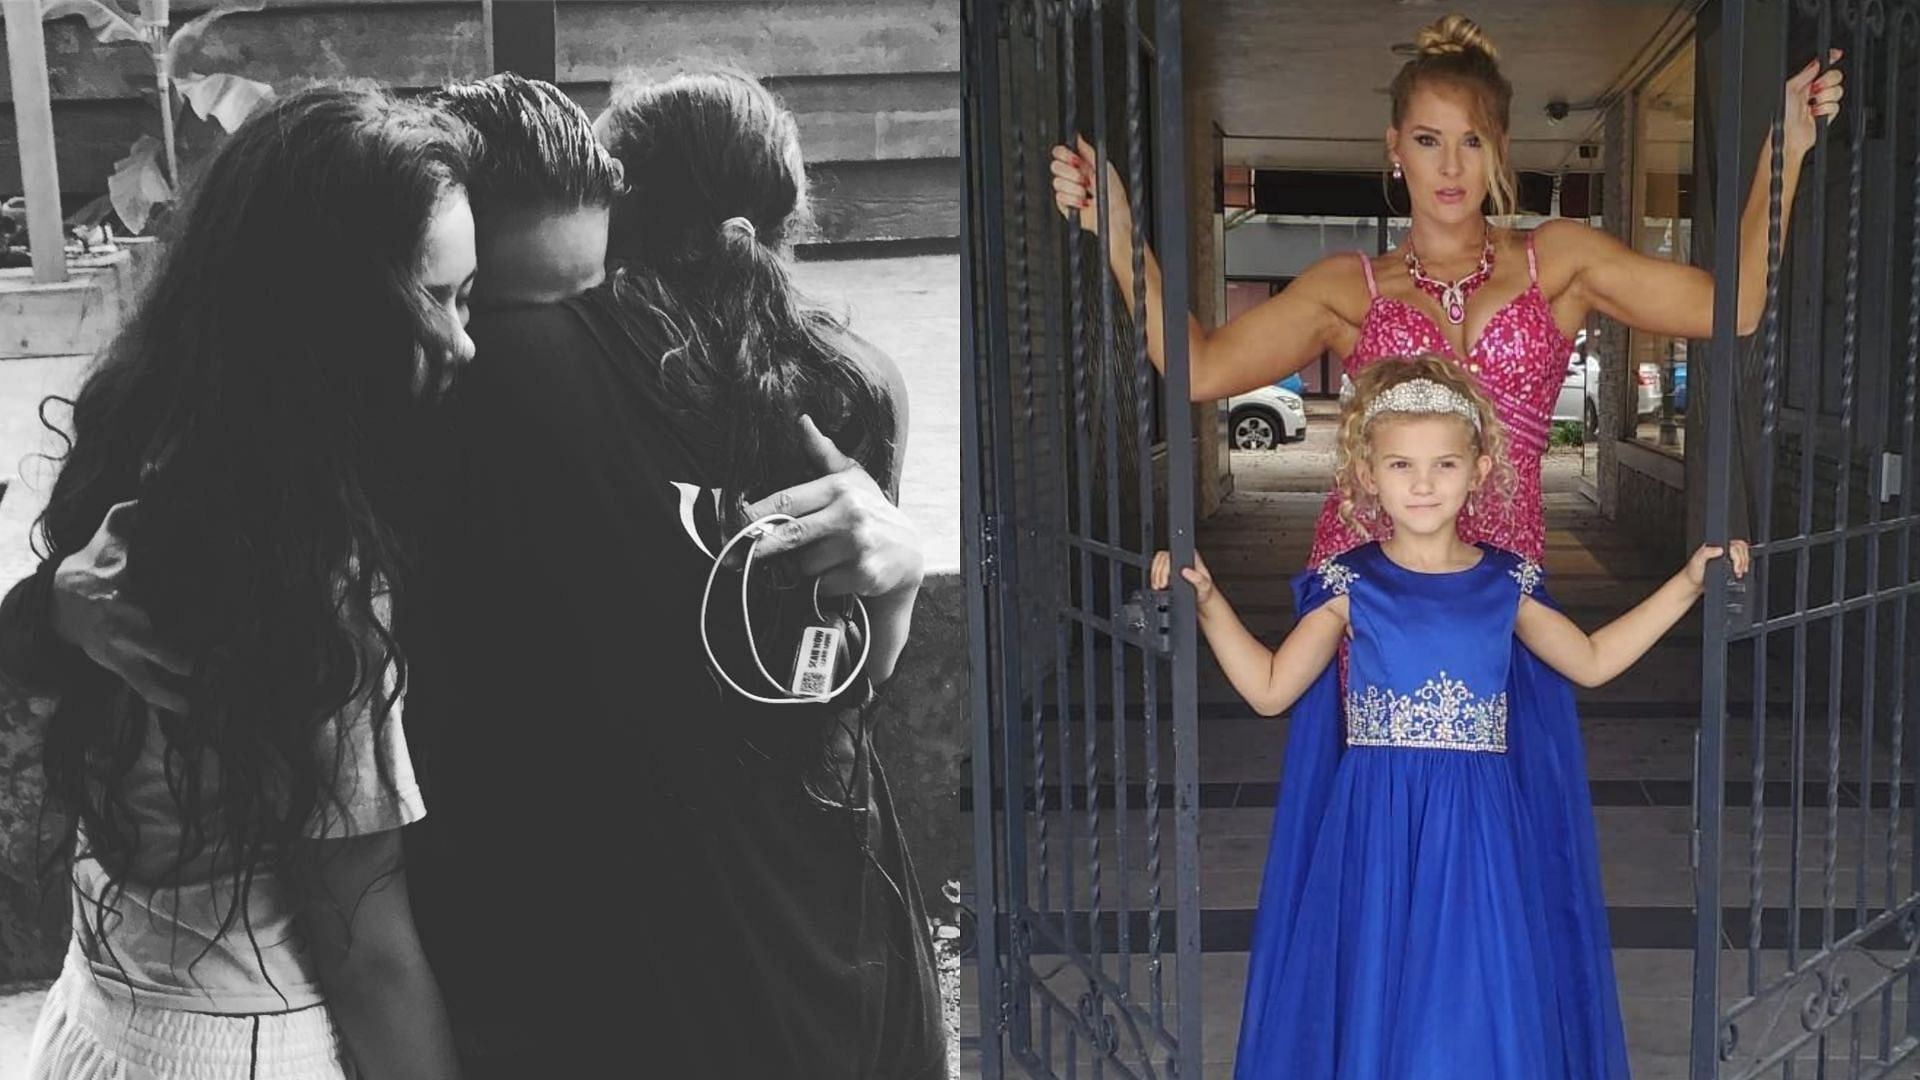 Tamina with her daughters (left) and Lacey Evans with her daughter, Summer (right)